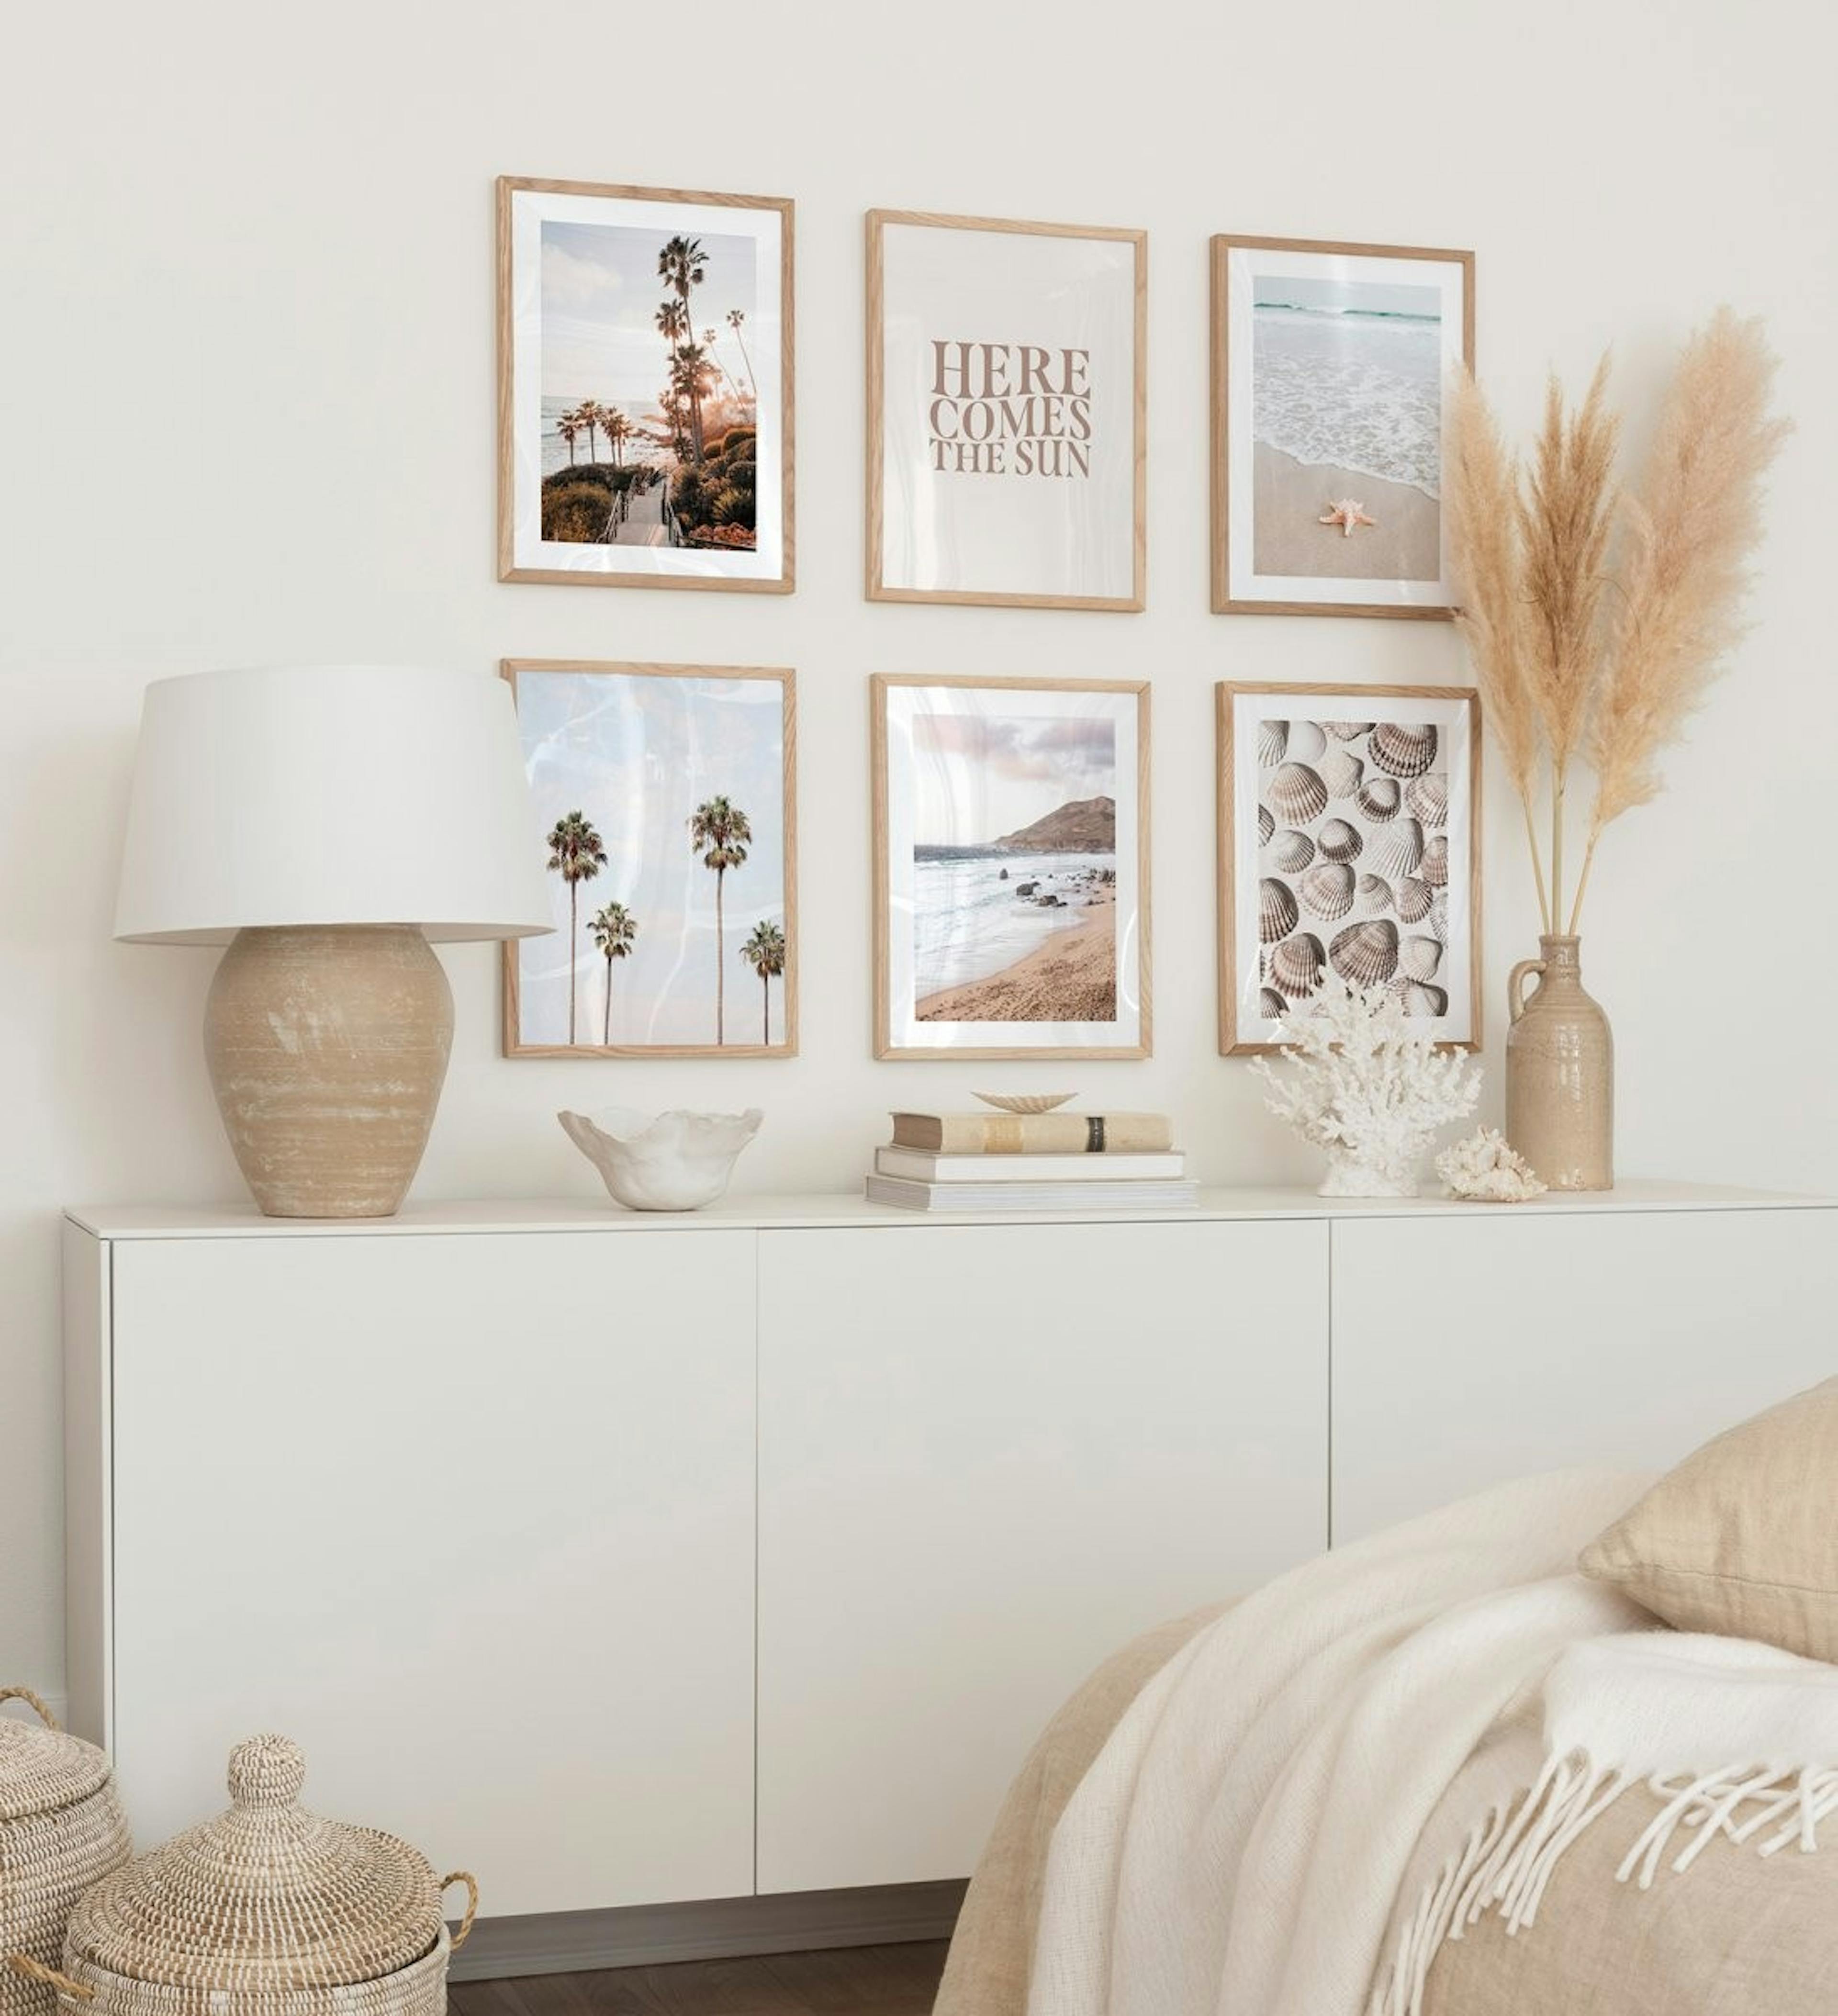 Bedroom gallery wall with tropical beach prints in wooden oak frames.